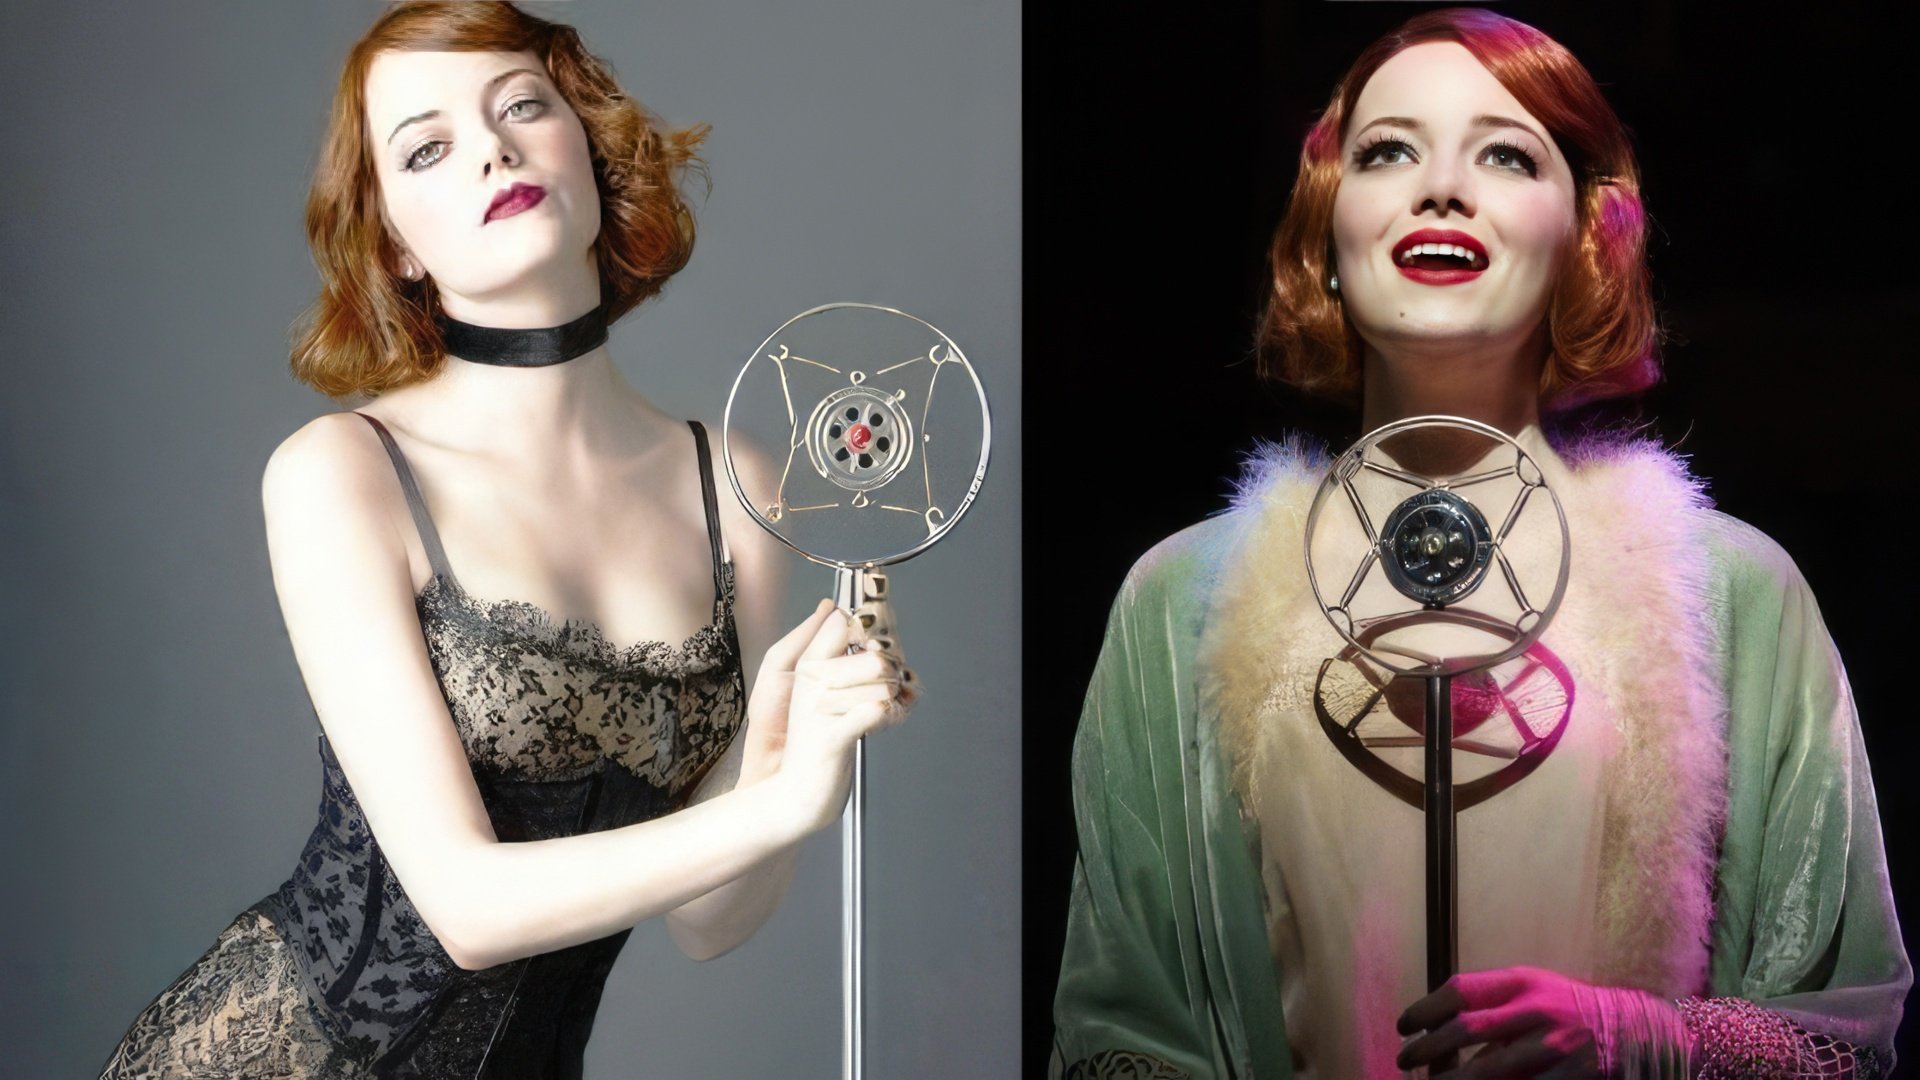 Emma Stone in a Broadway musical “Cabaret”